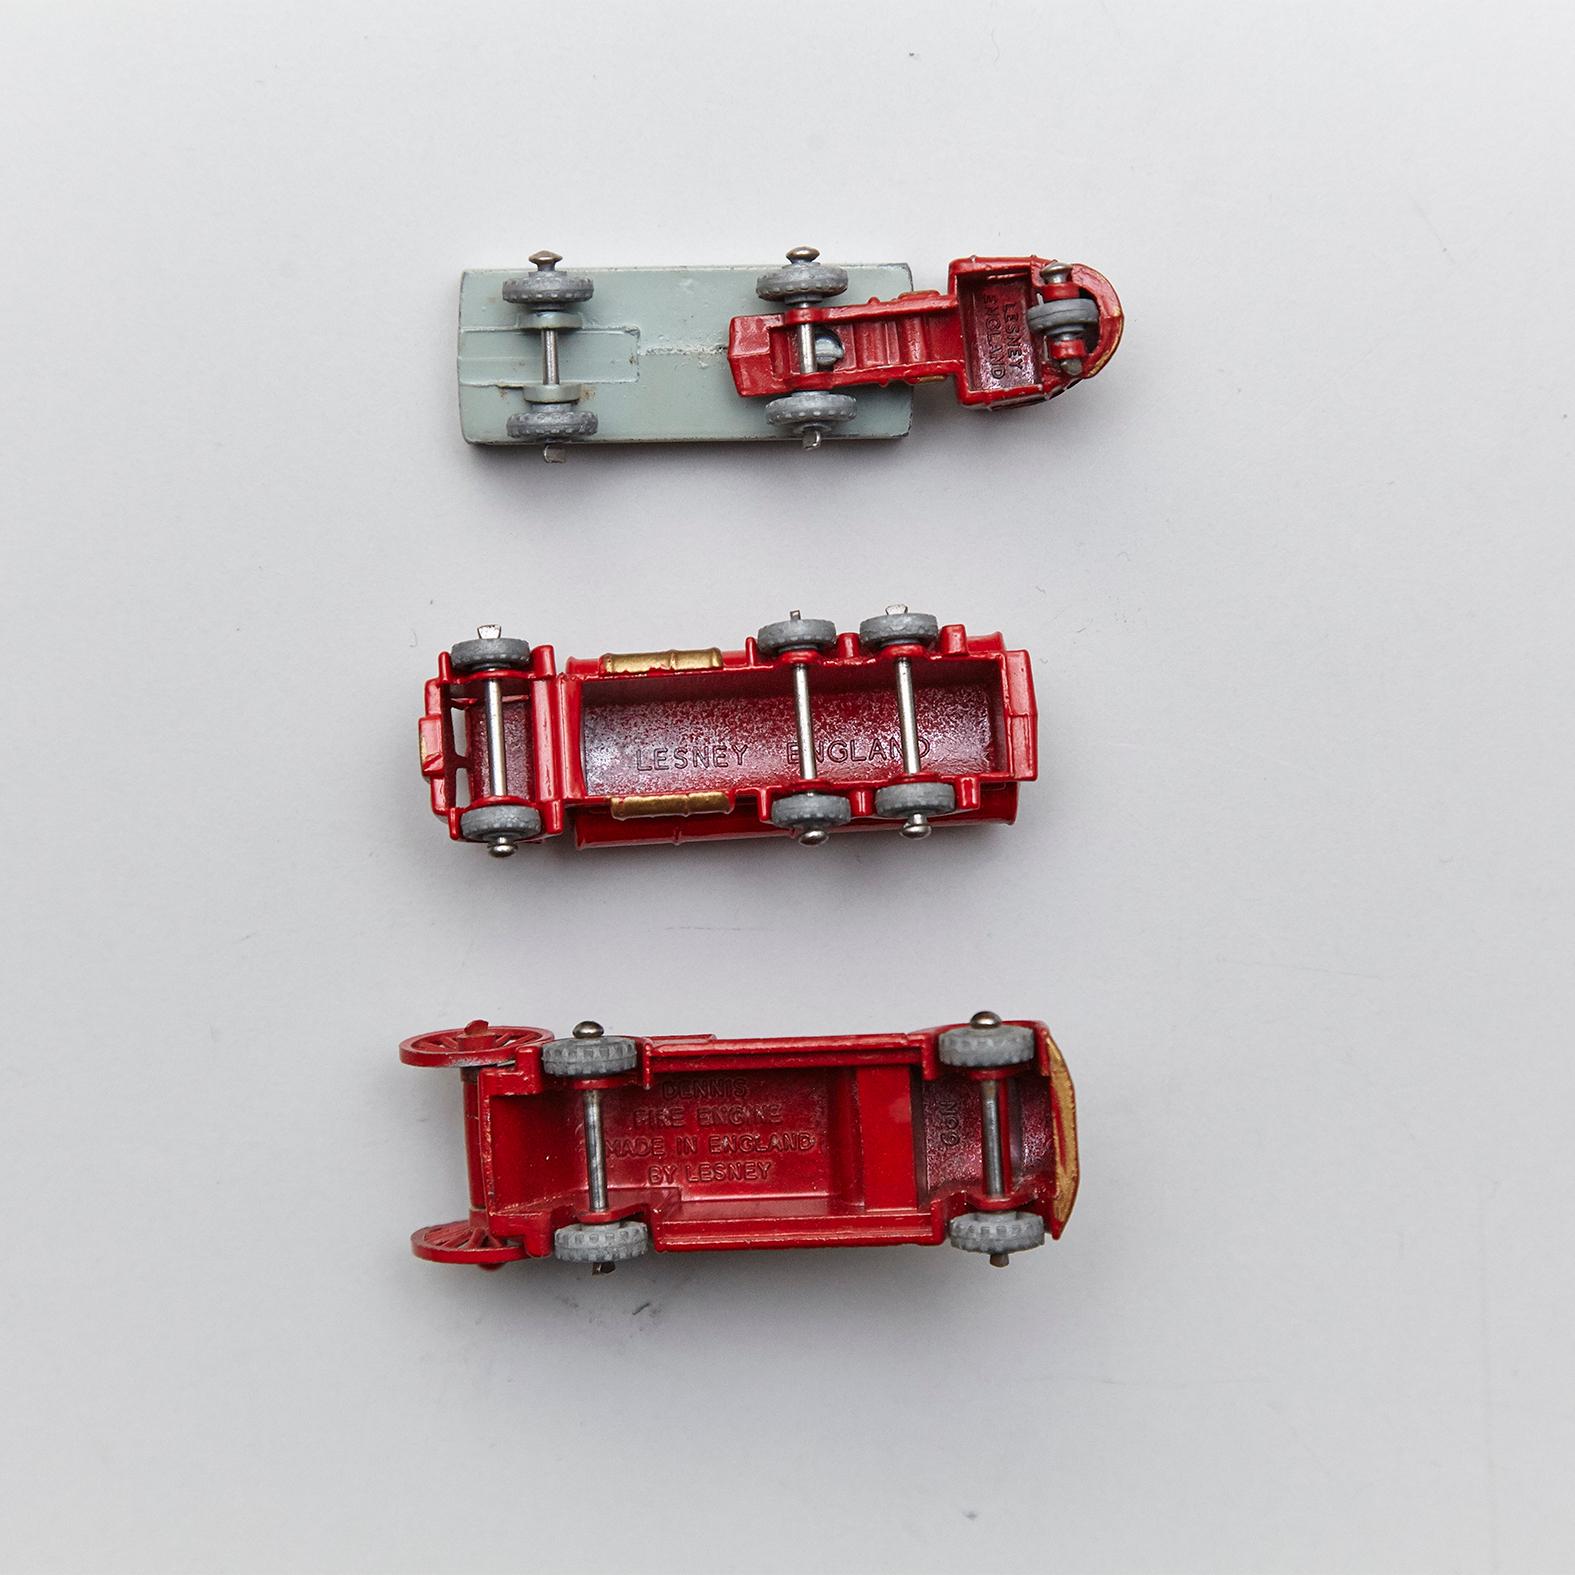 Lesney Matchboxes Series Antique Metal Toy, Three Red Fire Trucks, circa 1950 8